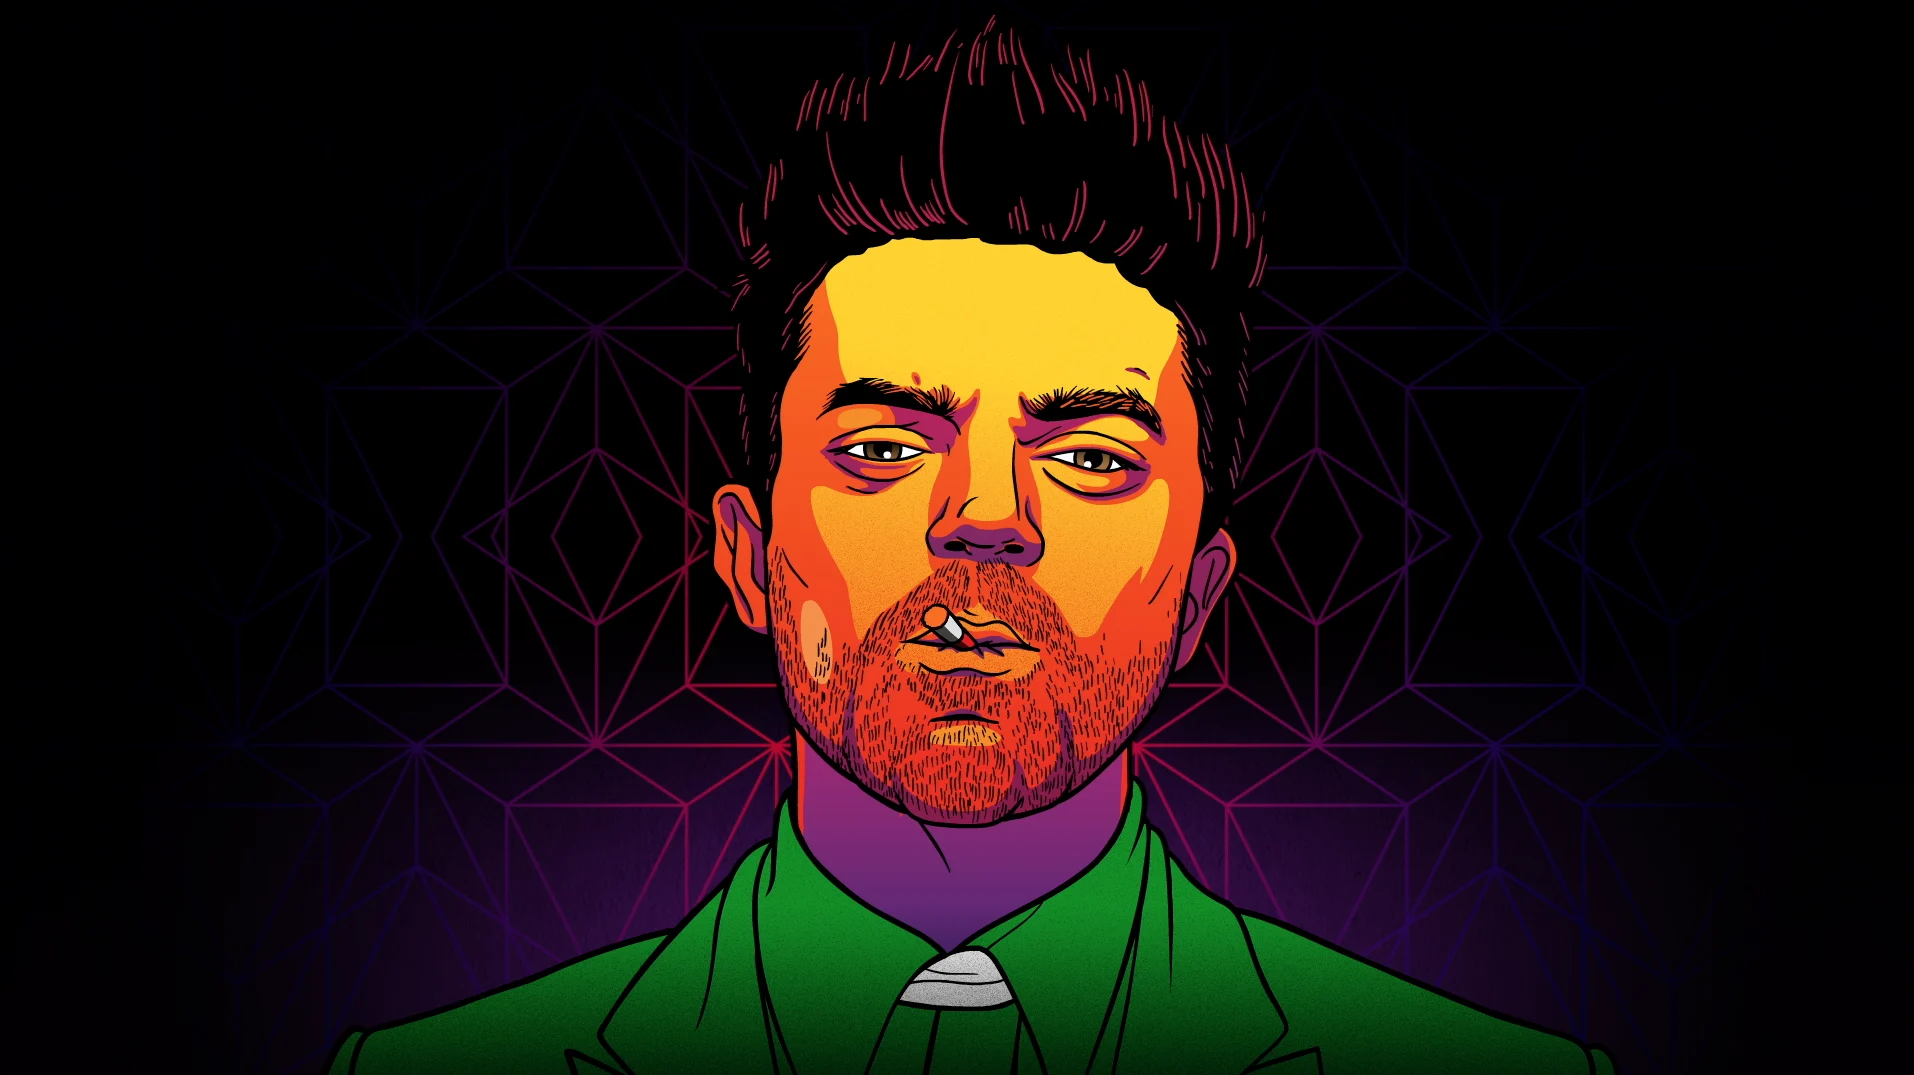 We put in our all for two promotional spots for AMC’s Preacher, combining flash/2D, cel animation, and live-action film i​n a uniquely stylized image spot for Preacher’s third season.